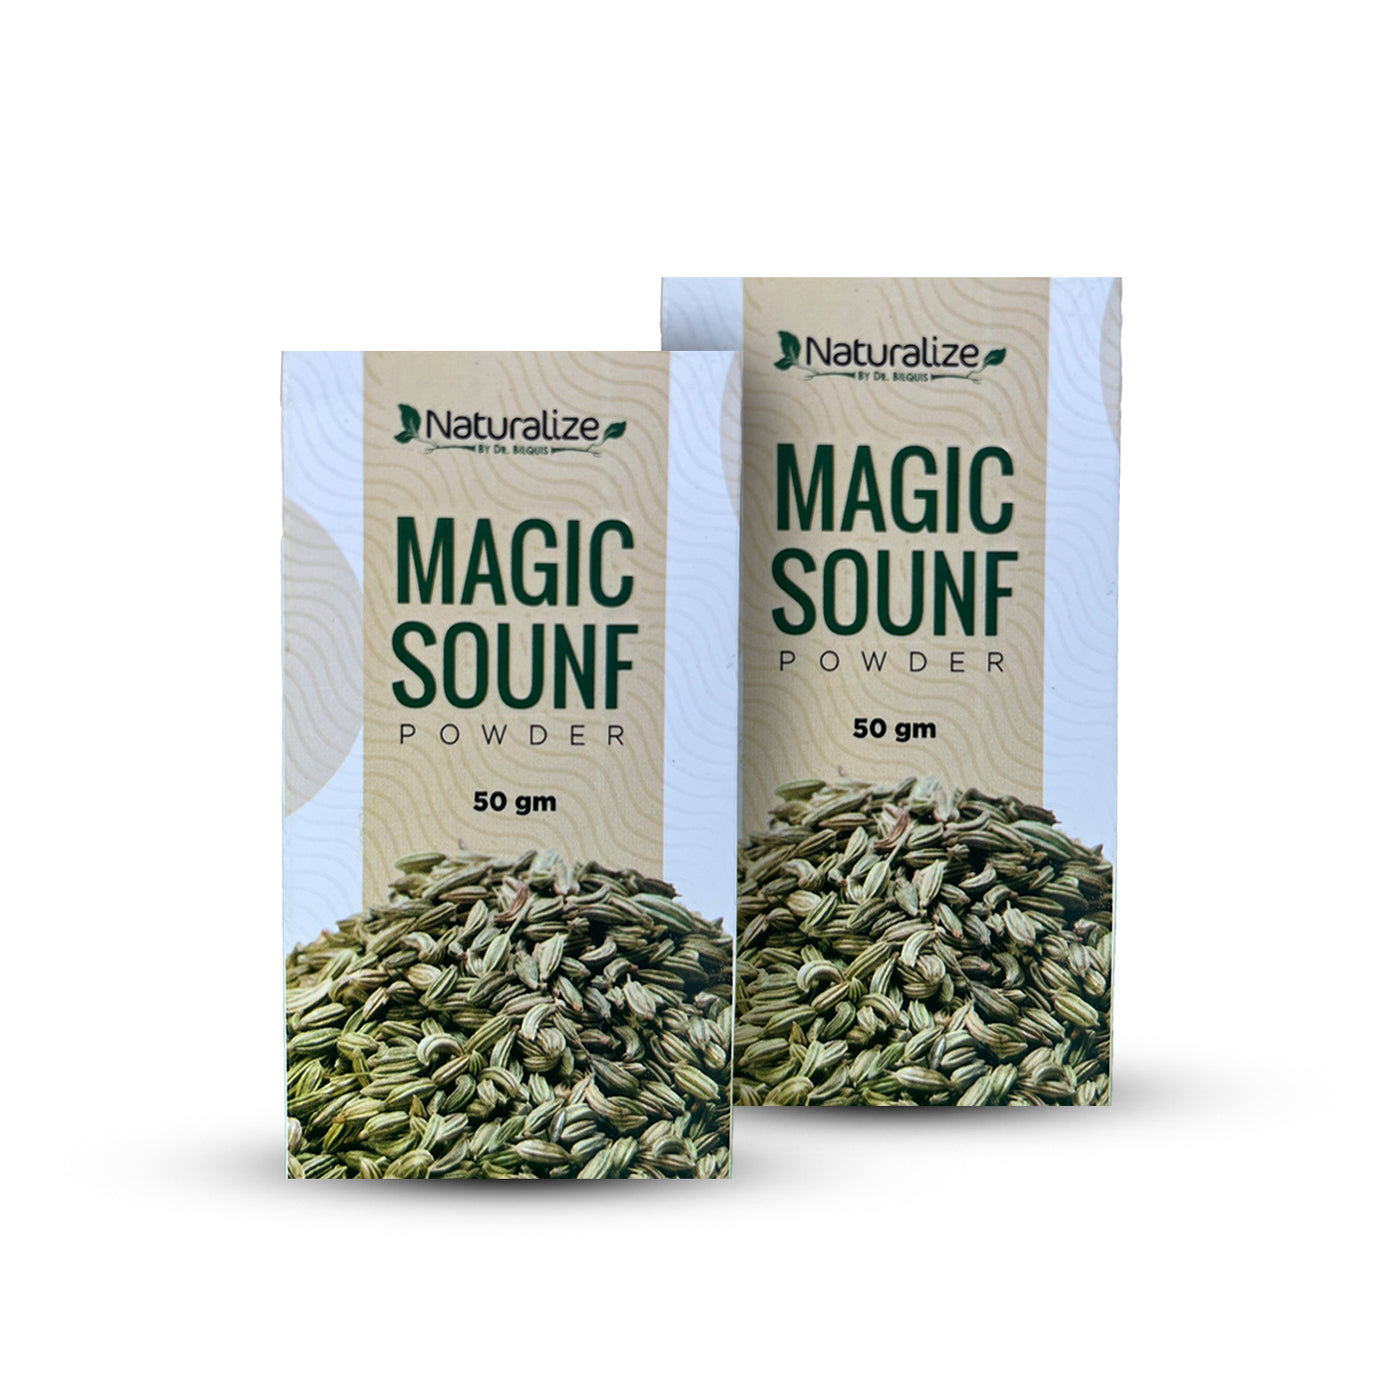 INSTANT WEIGHT LOSS KIT - Magic Sounf 200g By Dr Bilquis Shaikh